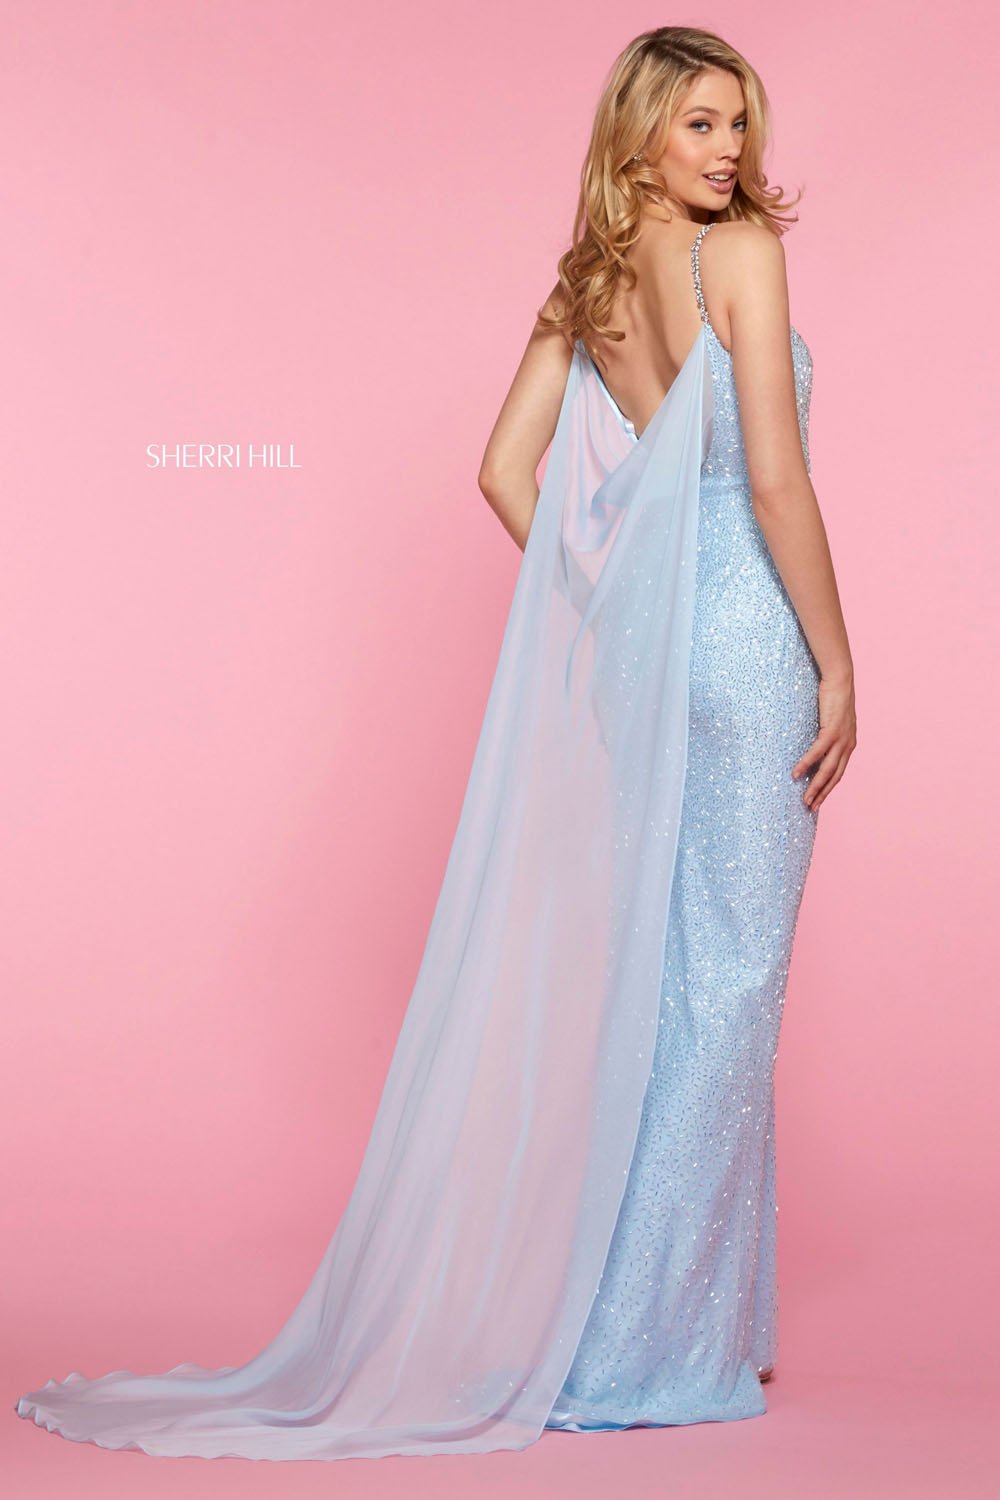 Sherri Hill 53494 dress images in these colors: Lilac Silver, Light Blue Silver, Ivory Silver, Blush Silver, Yellow Silver, Black, Red.